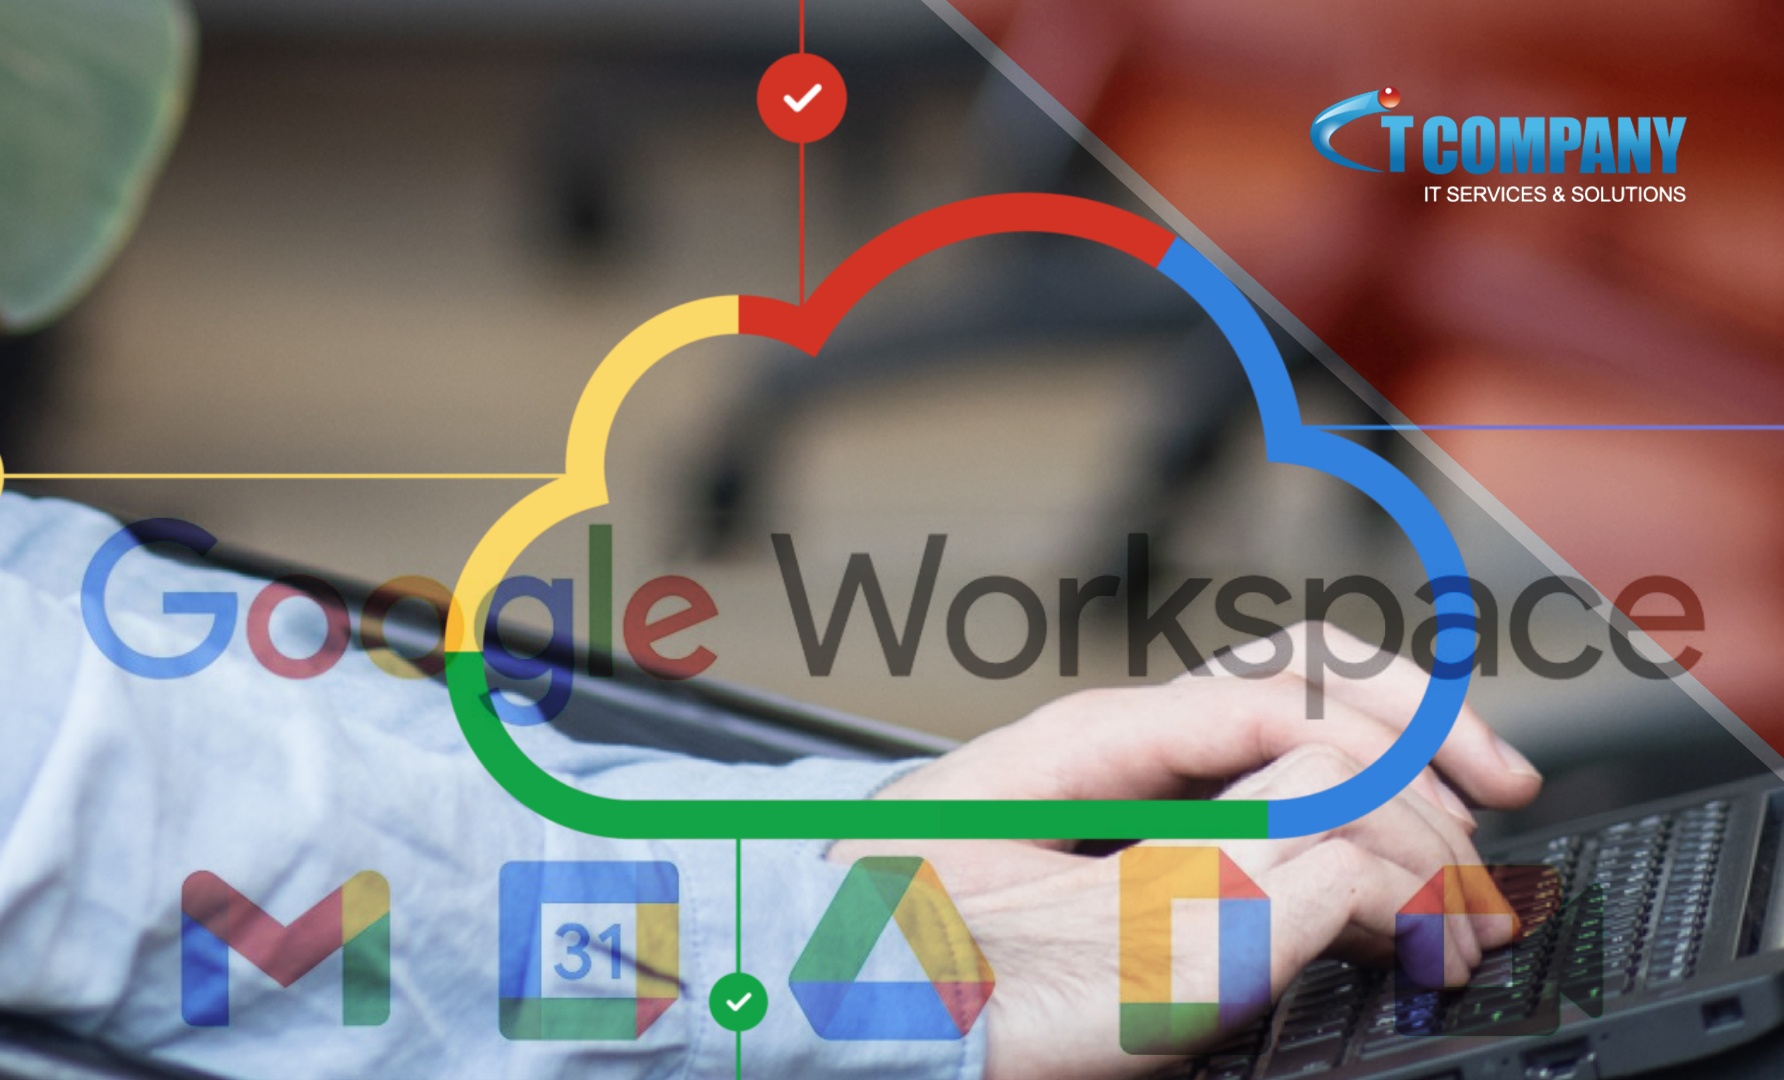 Google Workspace is concerned that hackers can access your sensitive data